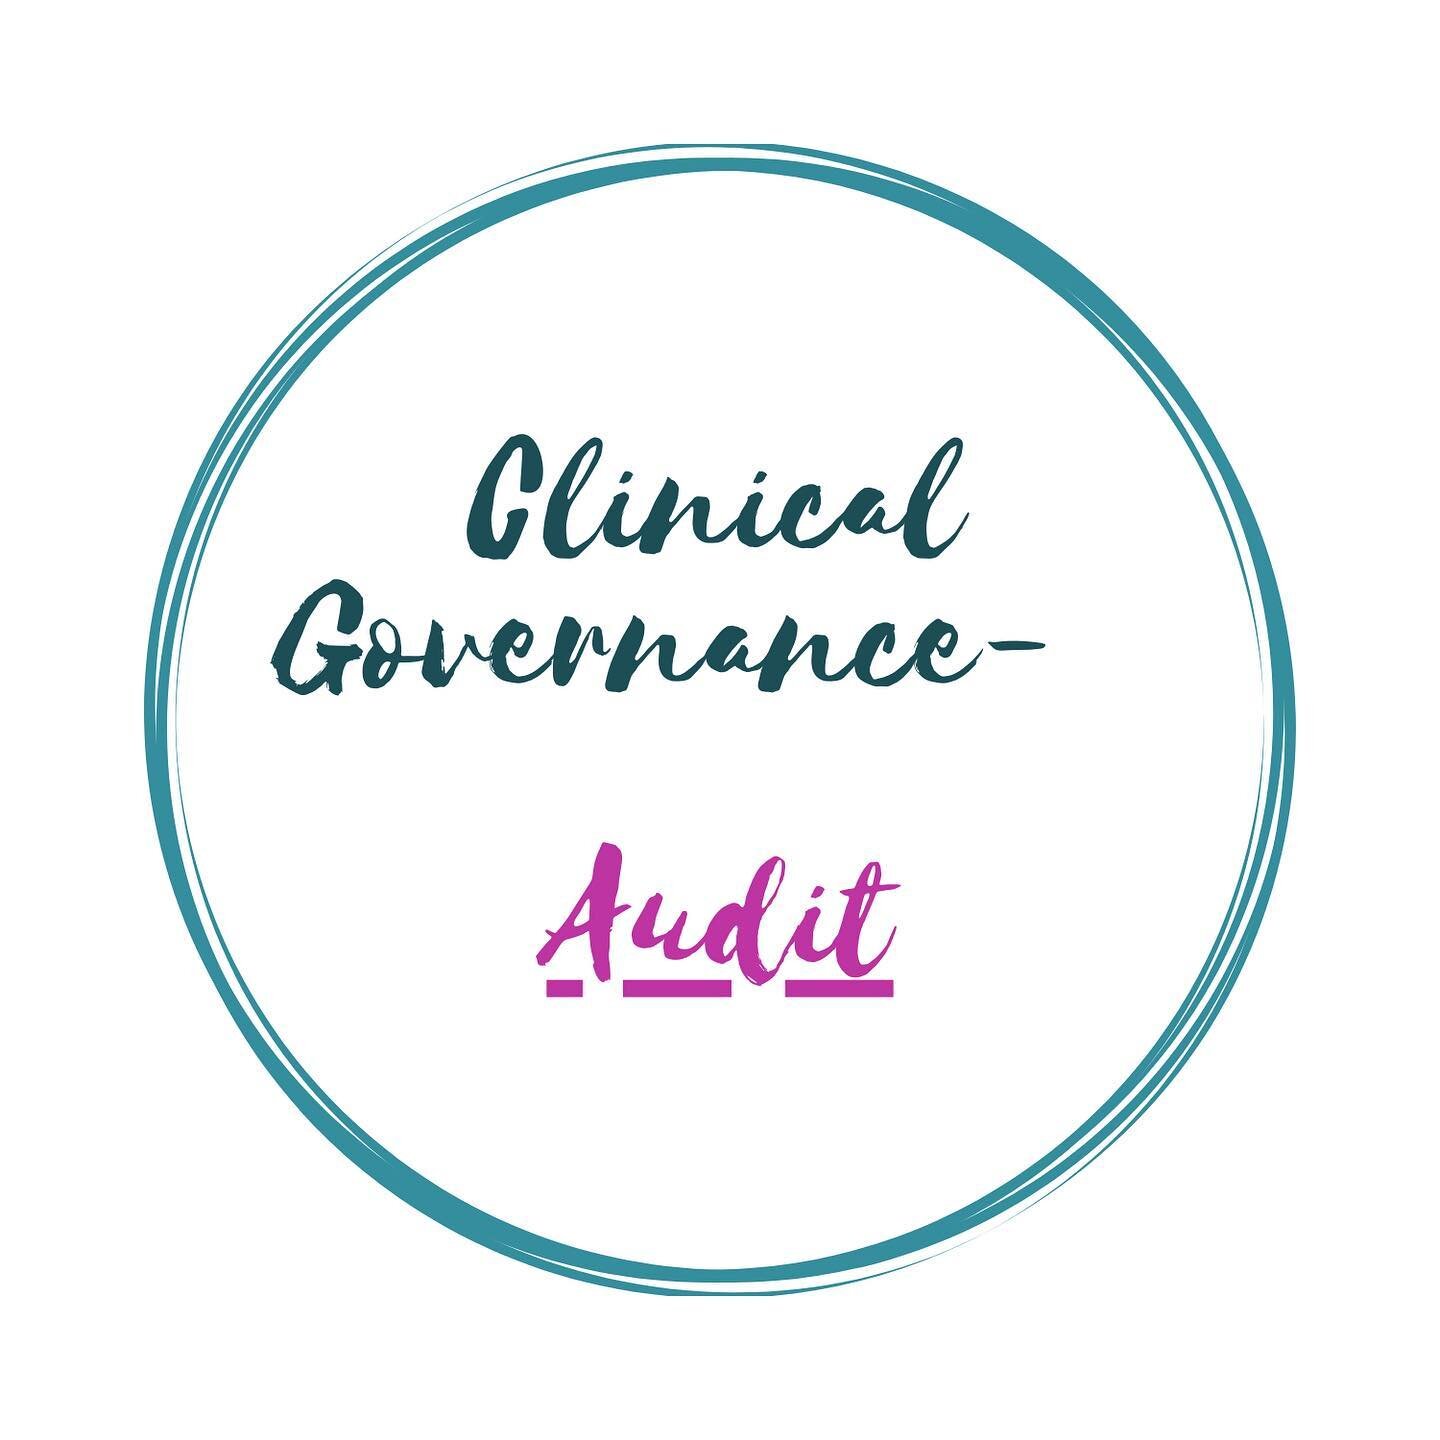 In this post aimed at those preparing for DCT interviews and those interested in the field of clinical governance we go through audit - what is it? What is an Audit Cycle? What is the difference between Audit and Research?  Audit is a key topic of go